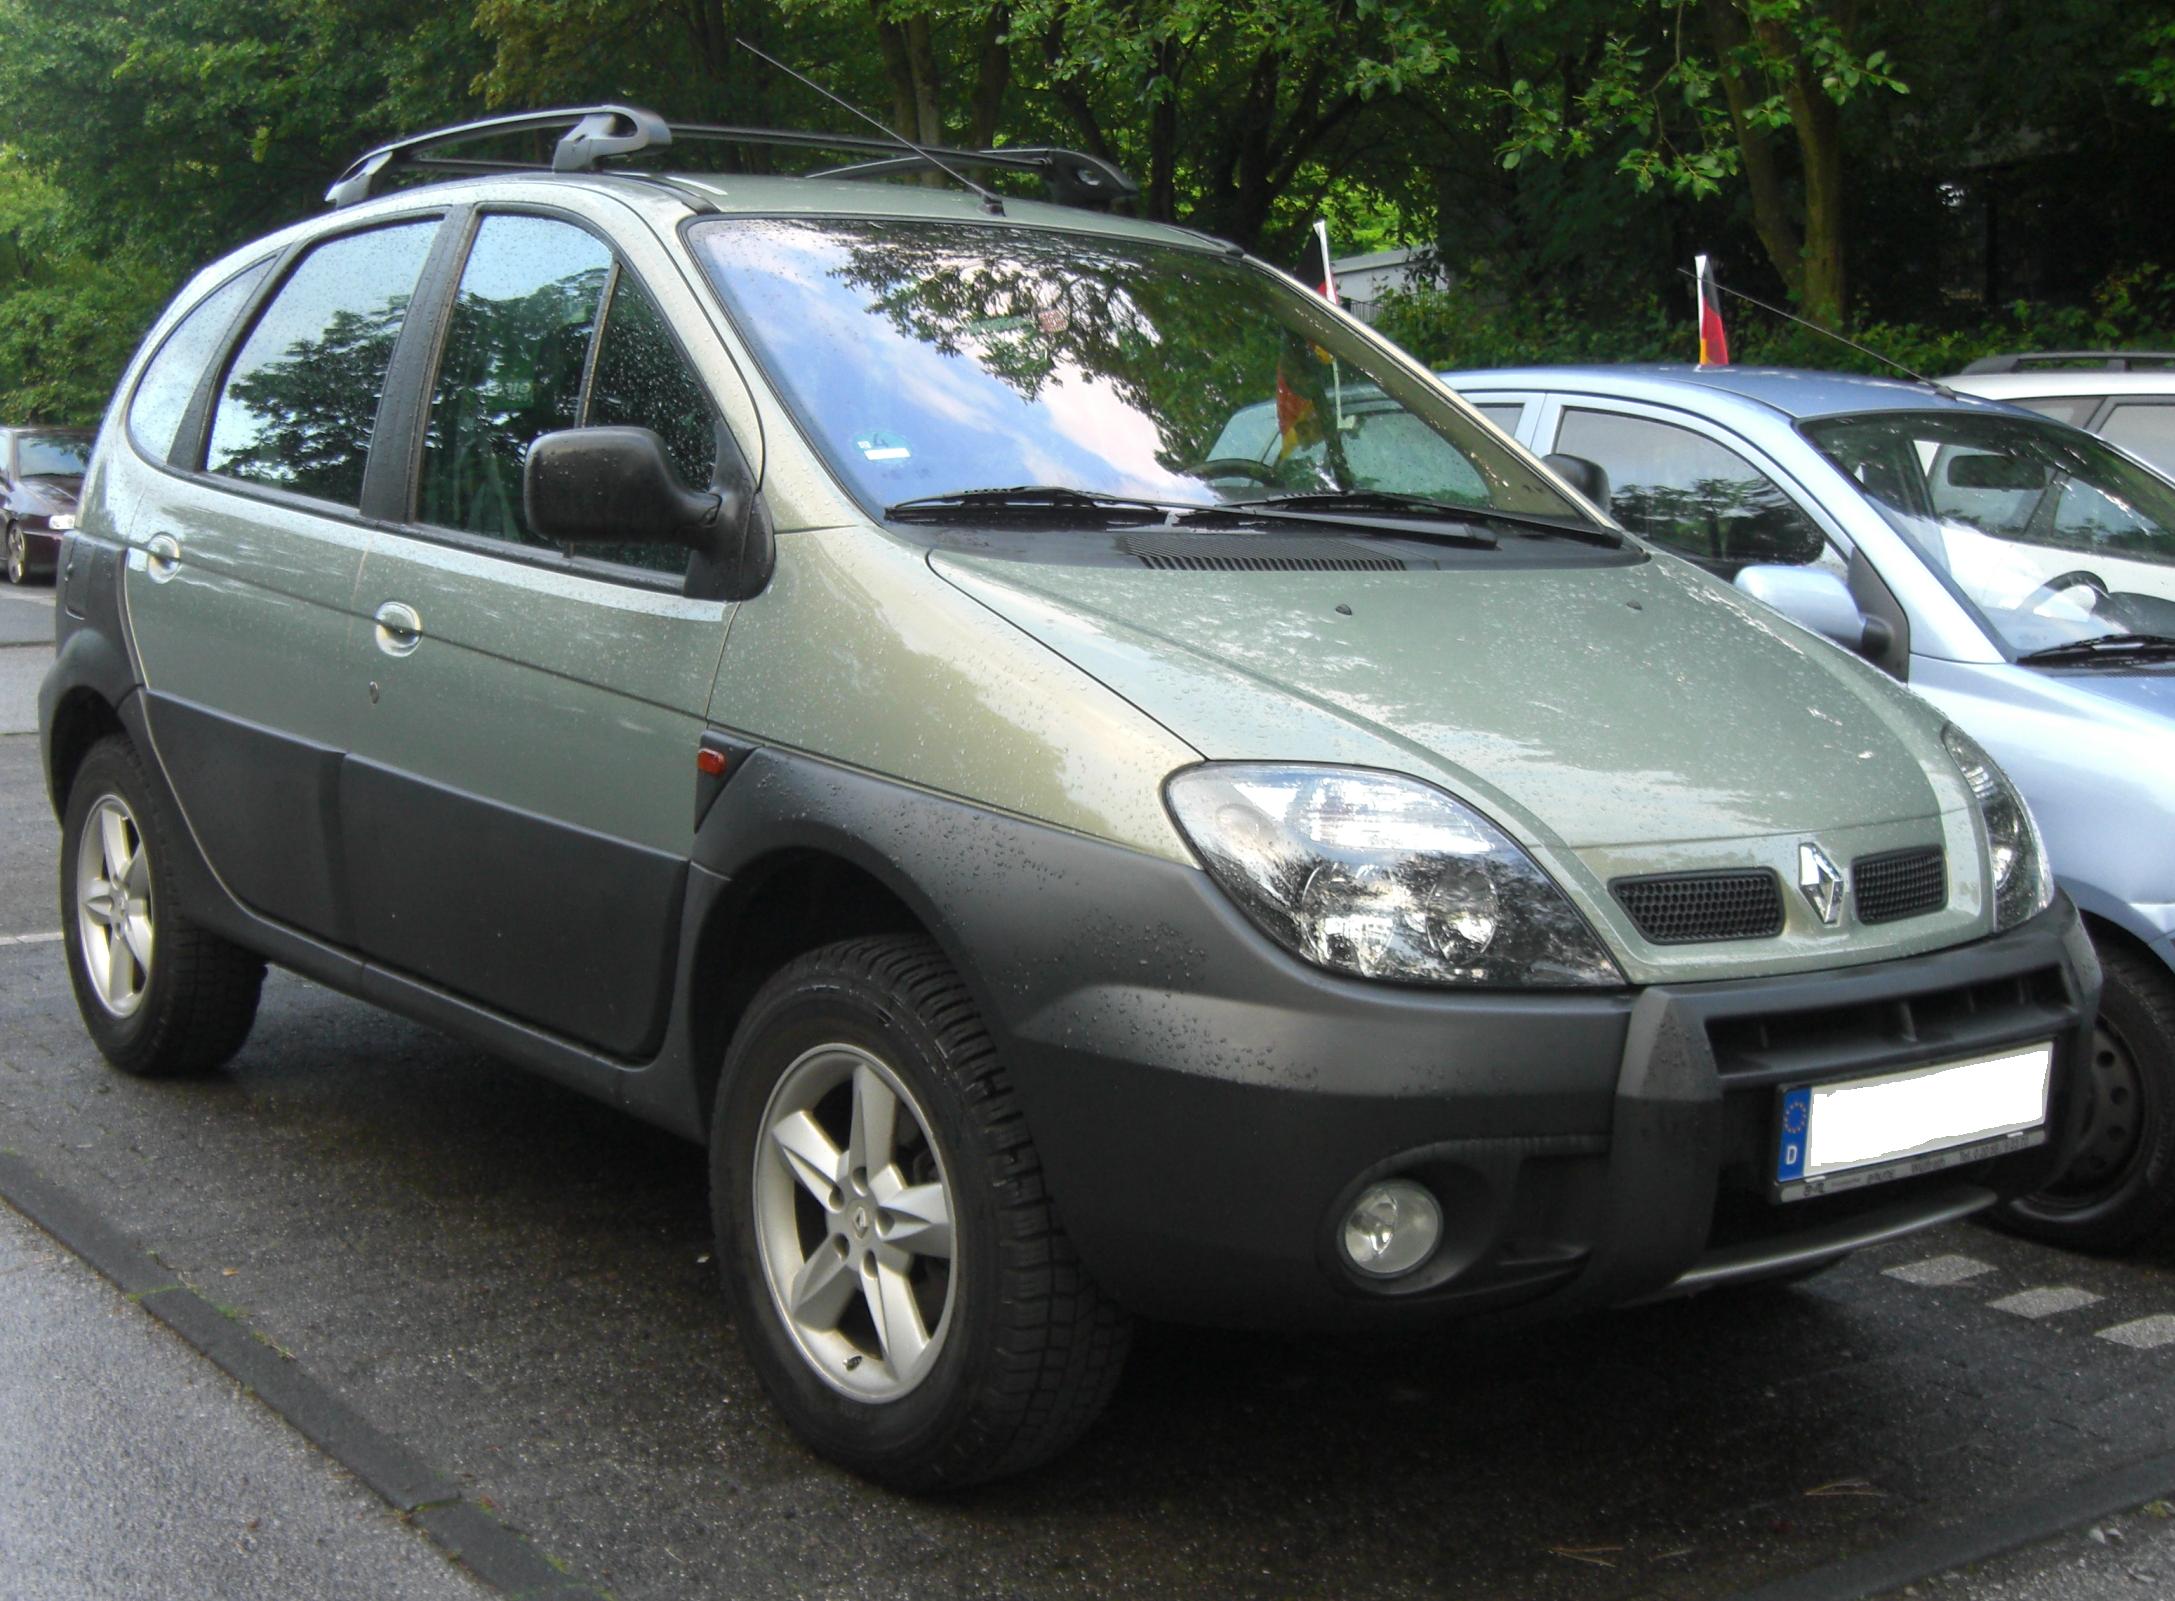 File:Renault Scénic RX4 front.jpg - Wikimedia Commons